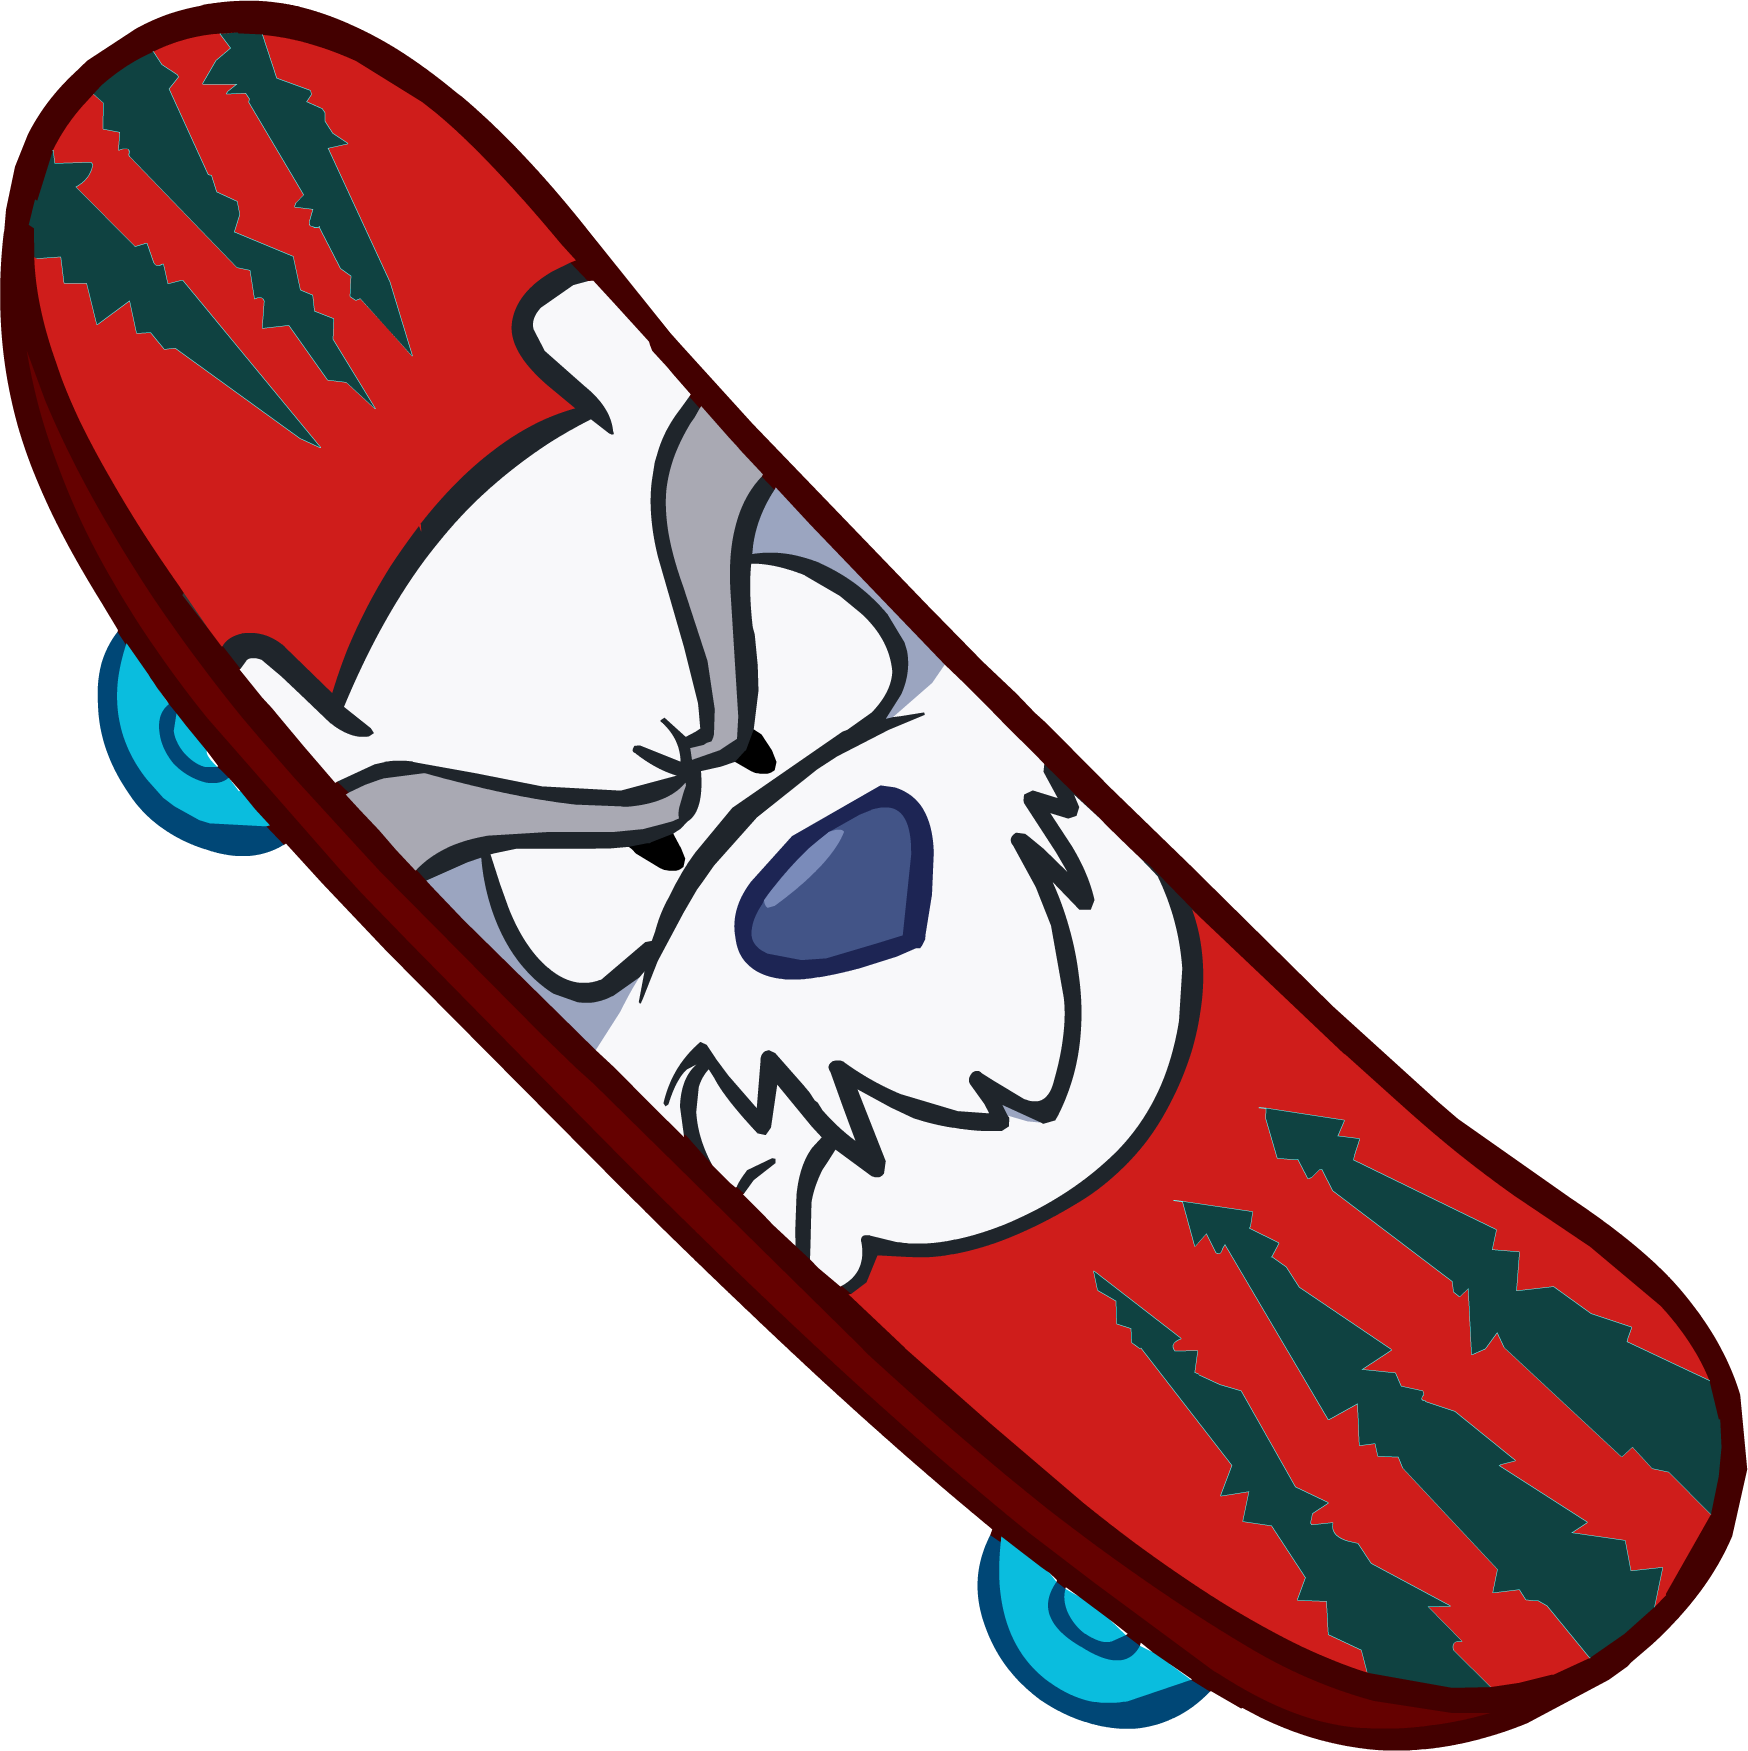 Red clipart skateboard. School skate party interface